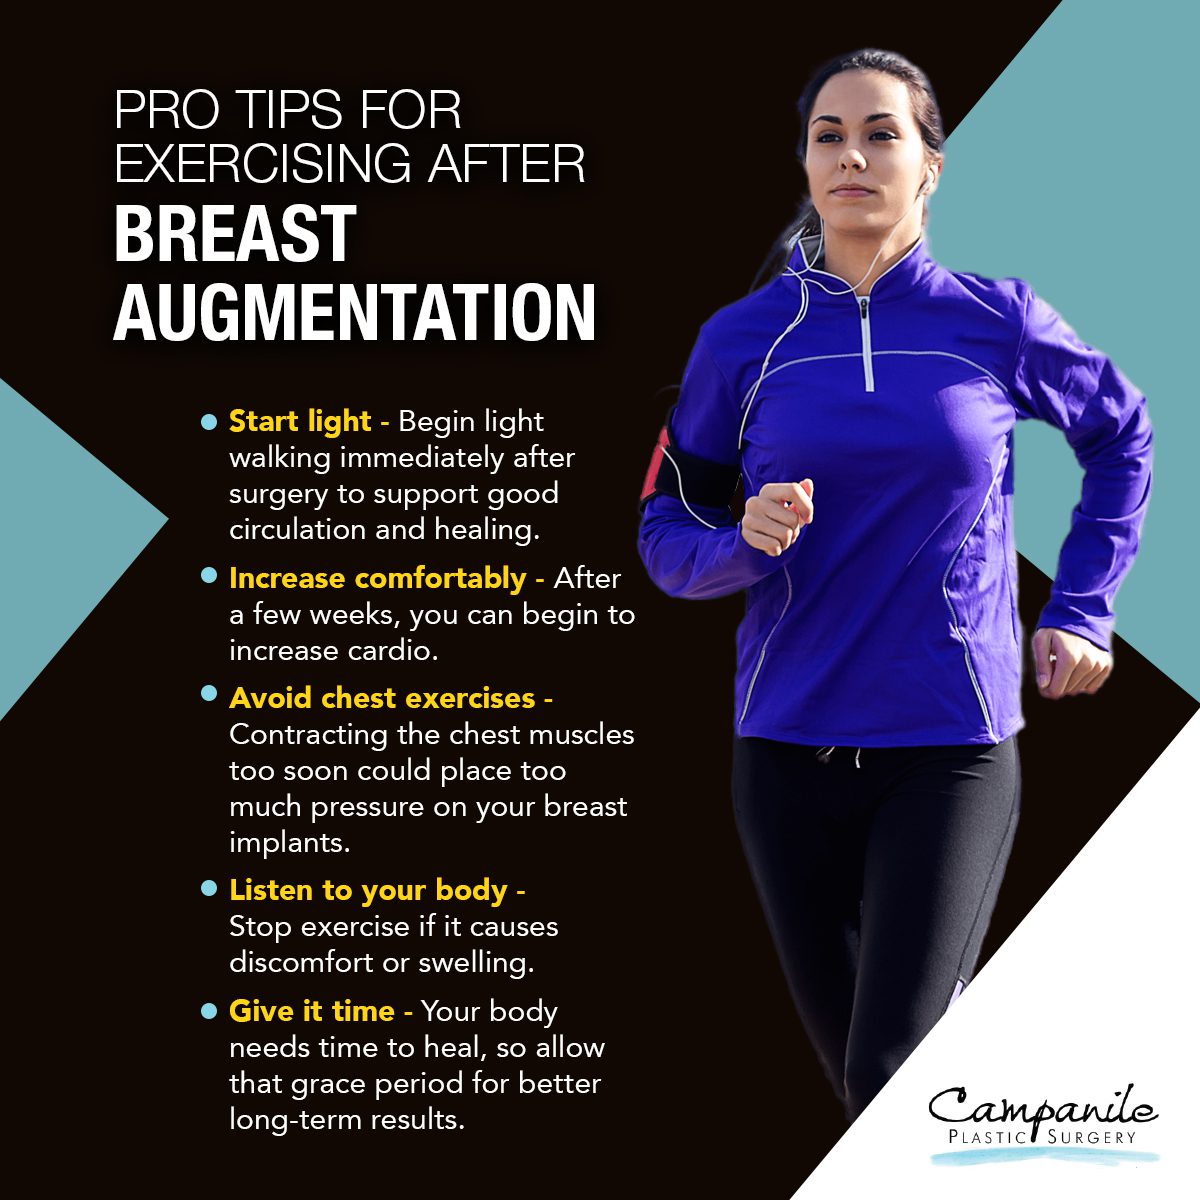 Pro Tips for Exercising after Breast Augmentation